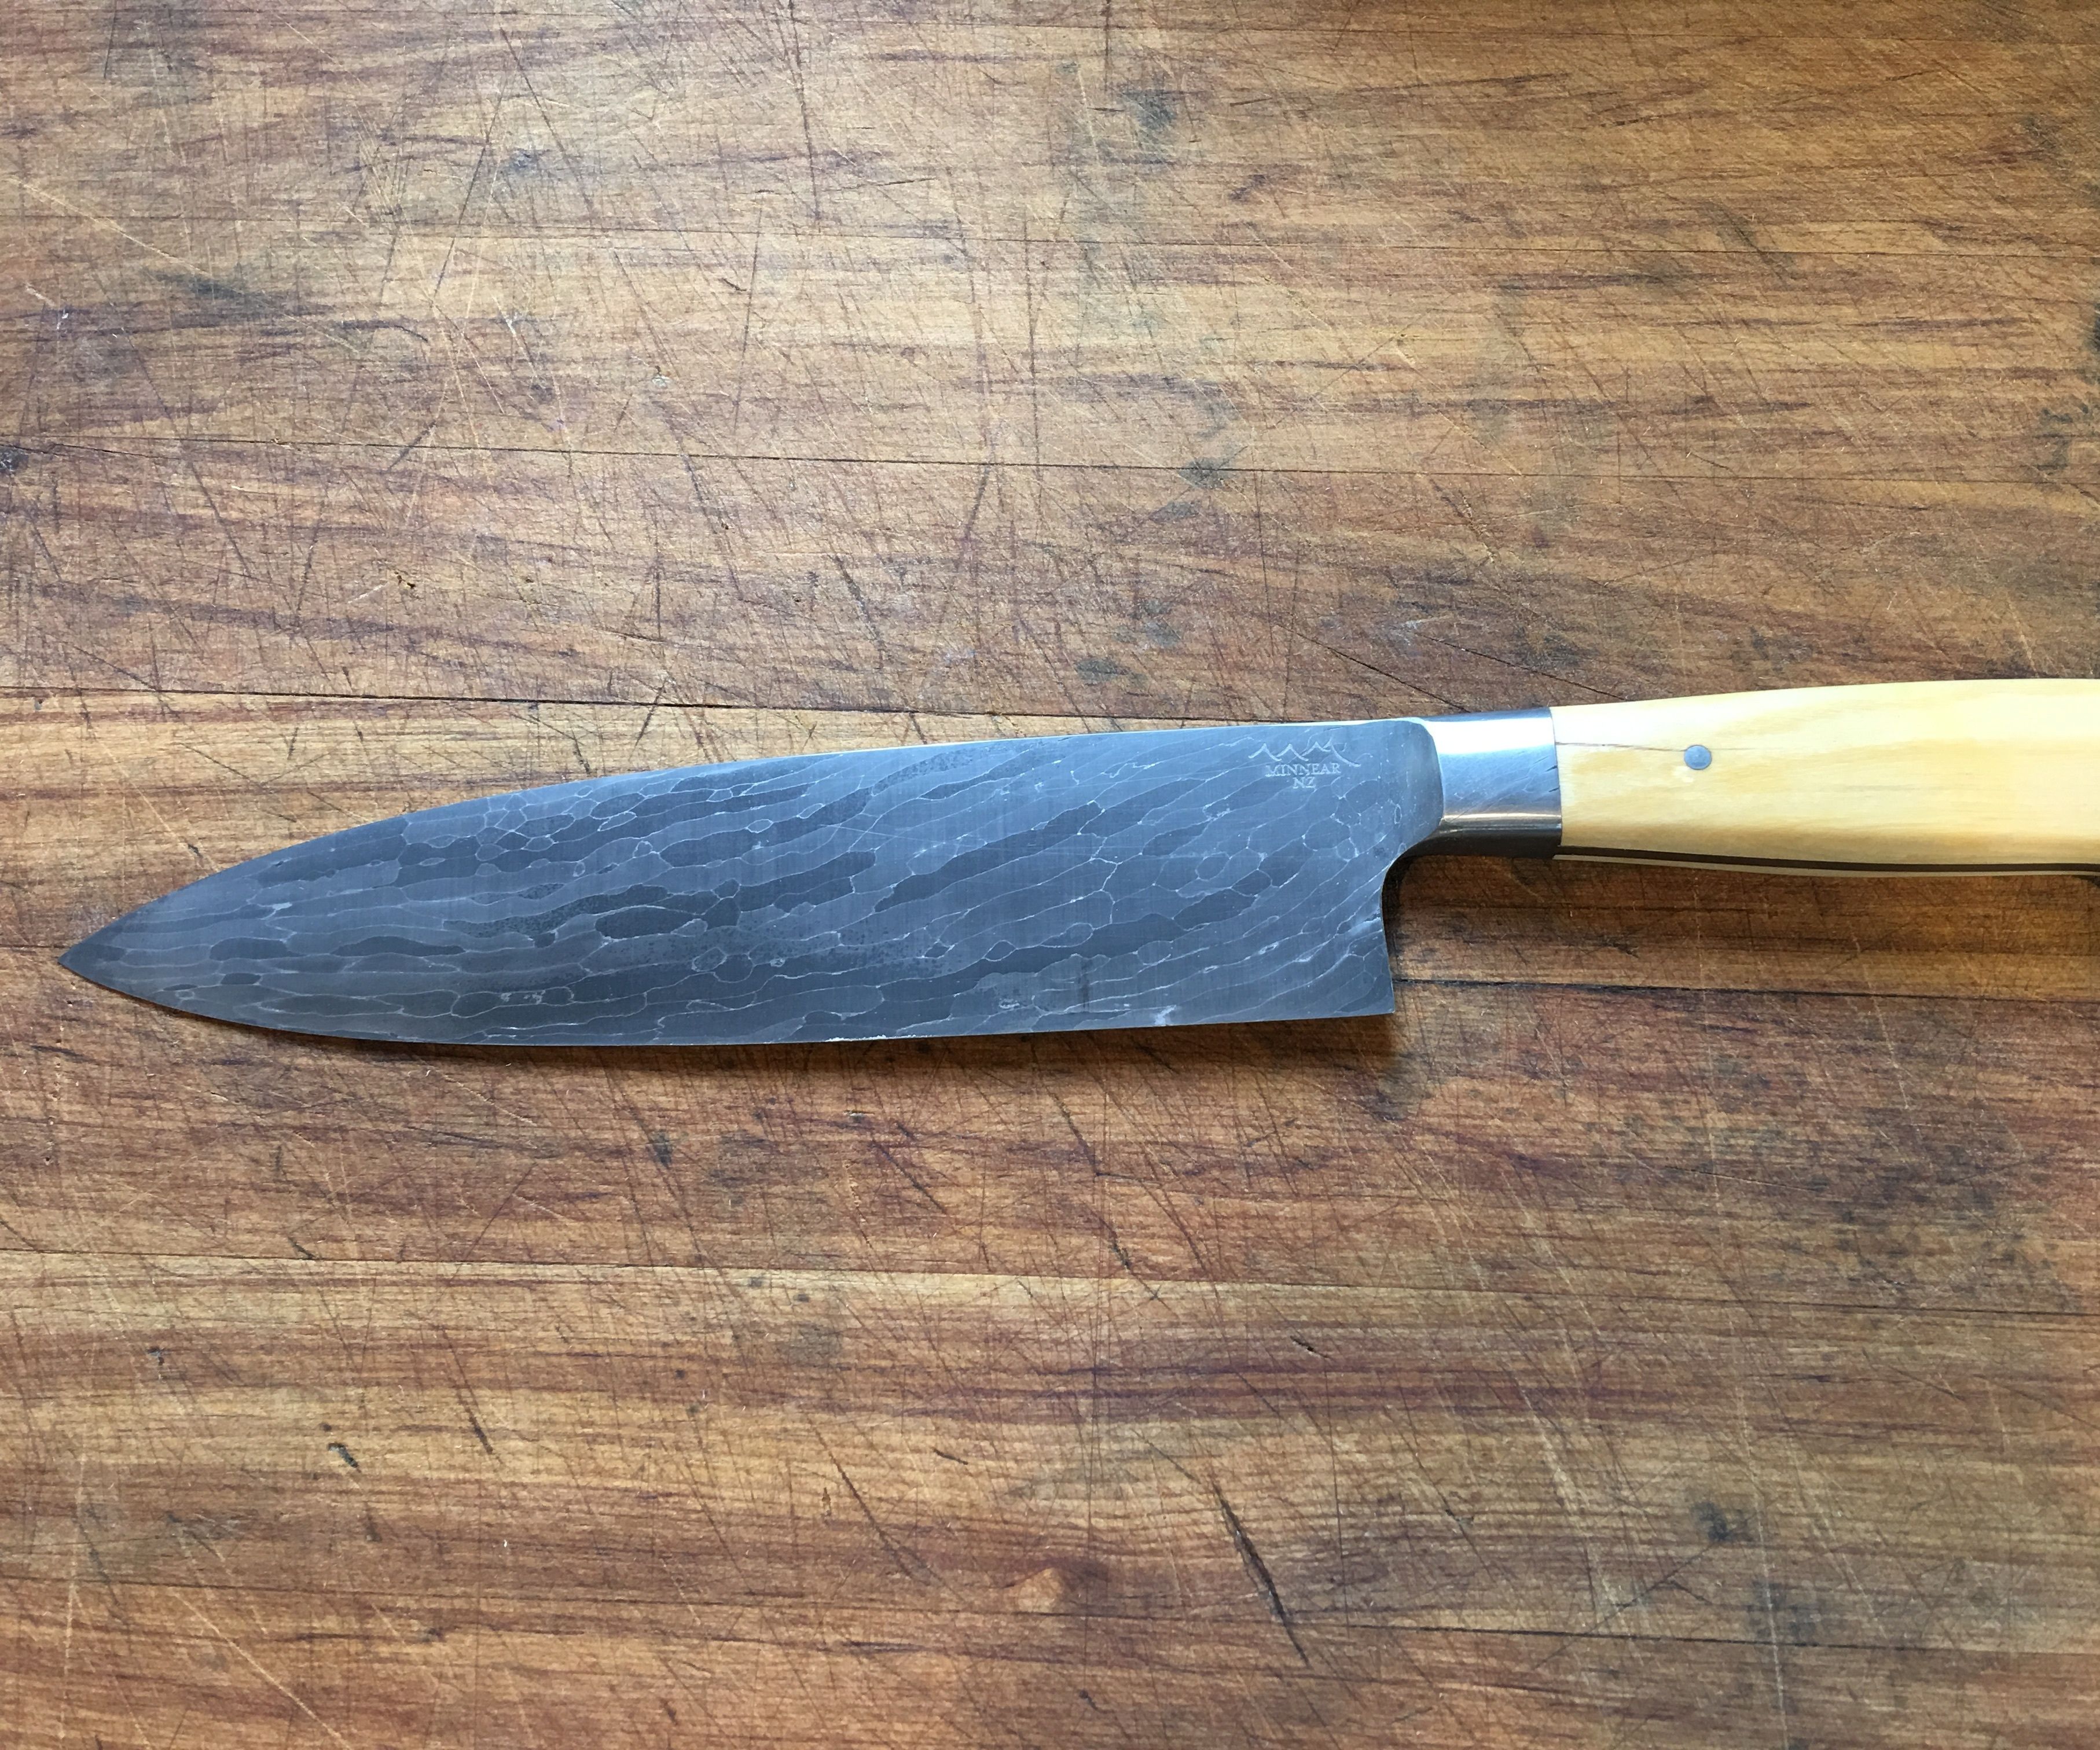 Knife Forged From Bicycle Spokes - a Truly Bespoke Knife!